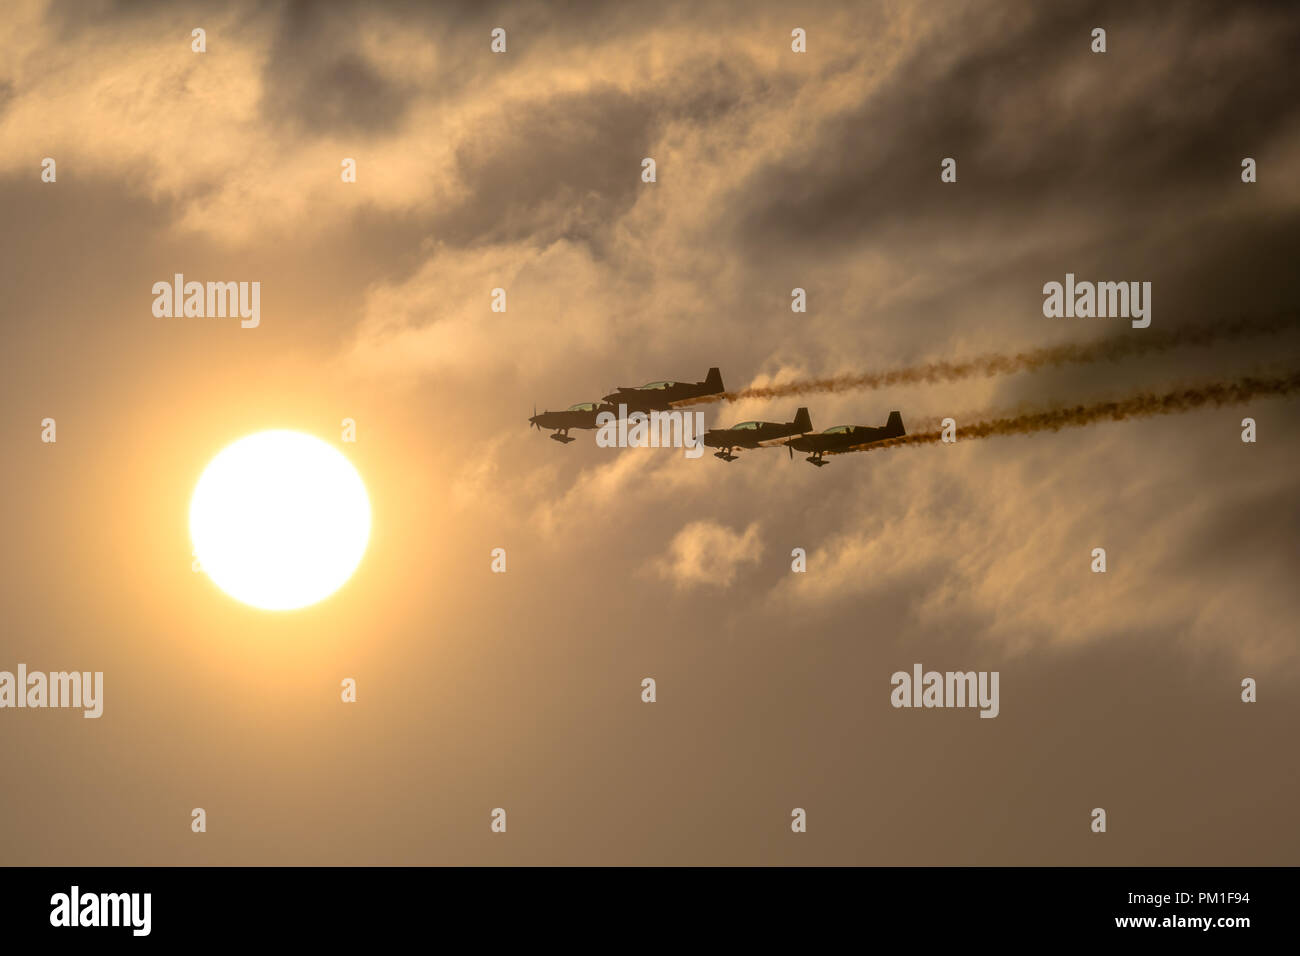 SOUTHPORT, UK JULY 6 2018:  A photograph documenting The Blades Aerobatic Display Team performing at dusk, flying across the setting sun, at the annua Stock Photo